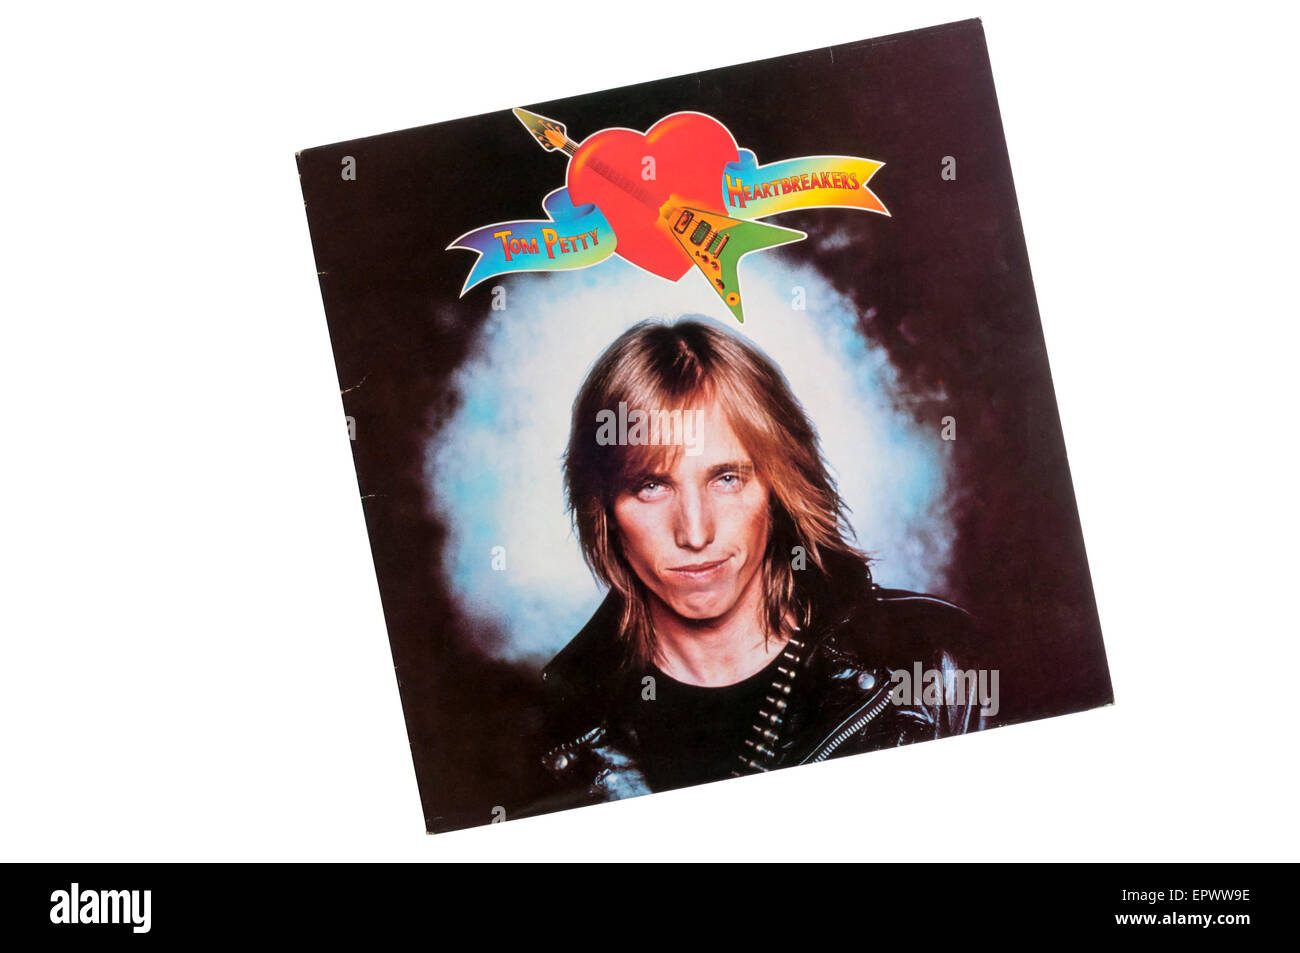 Tom Petty and the Heartbreakers was the eponymous debut album by the band of the same name, released in 1976 by Shelter Records. Stock Photo